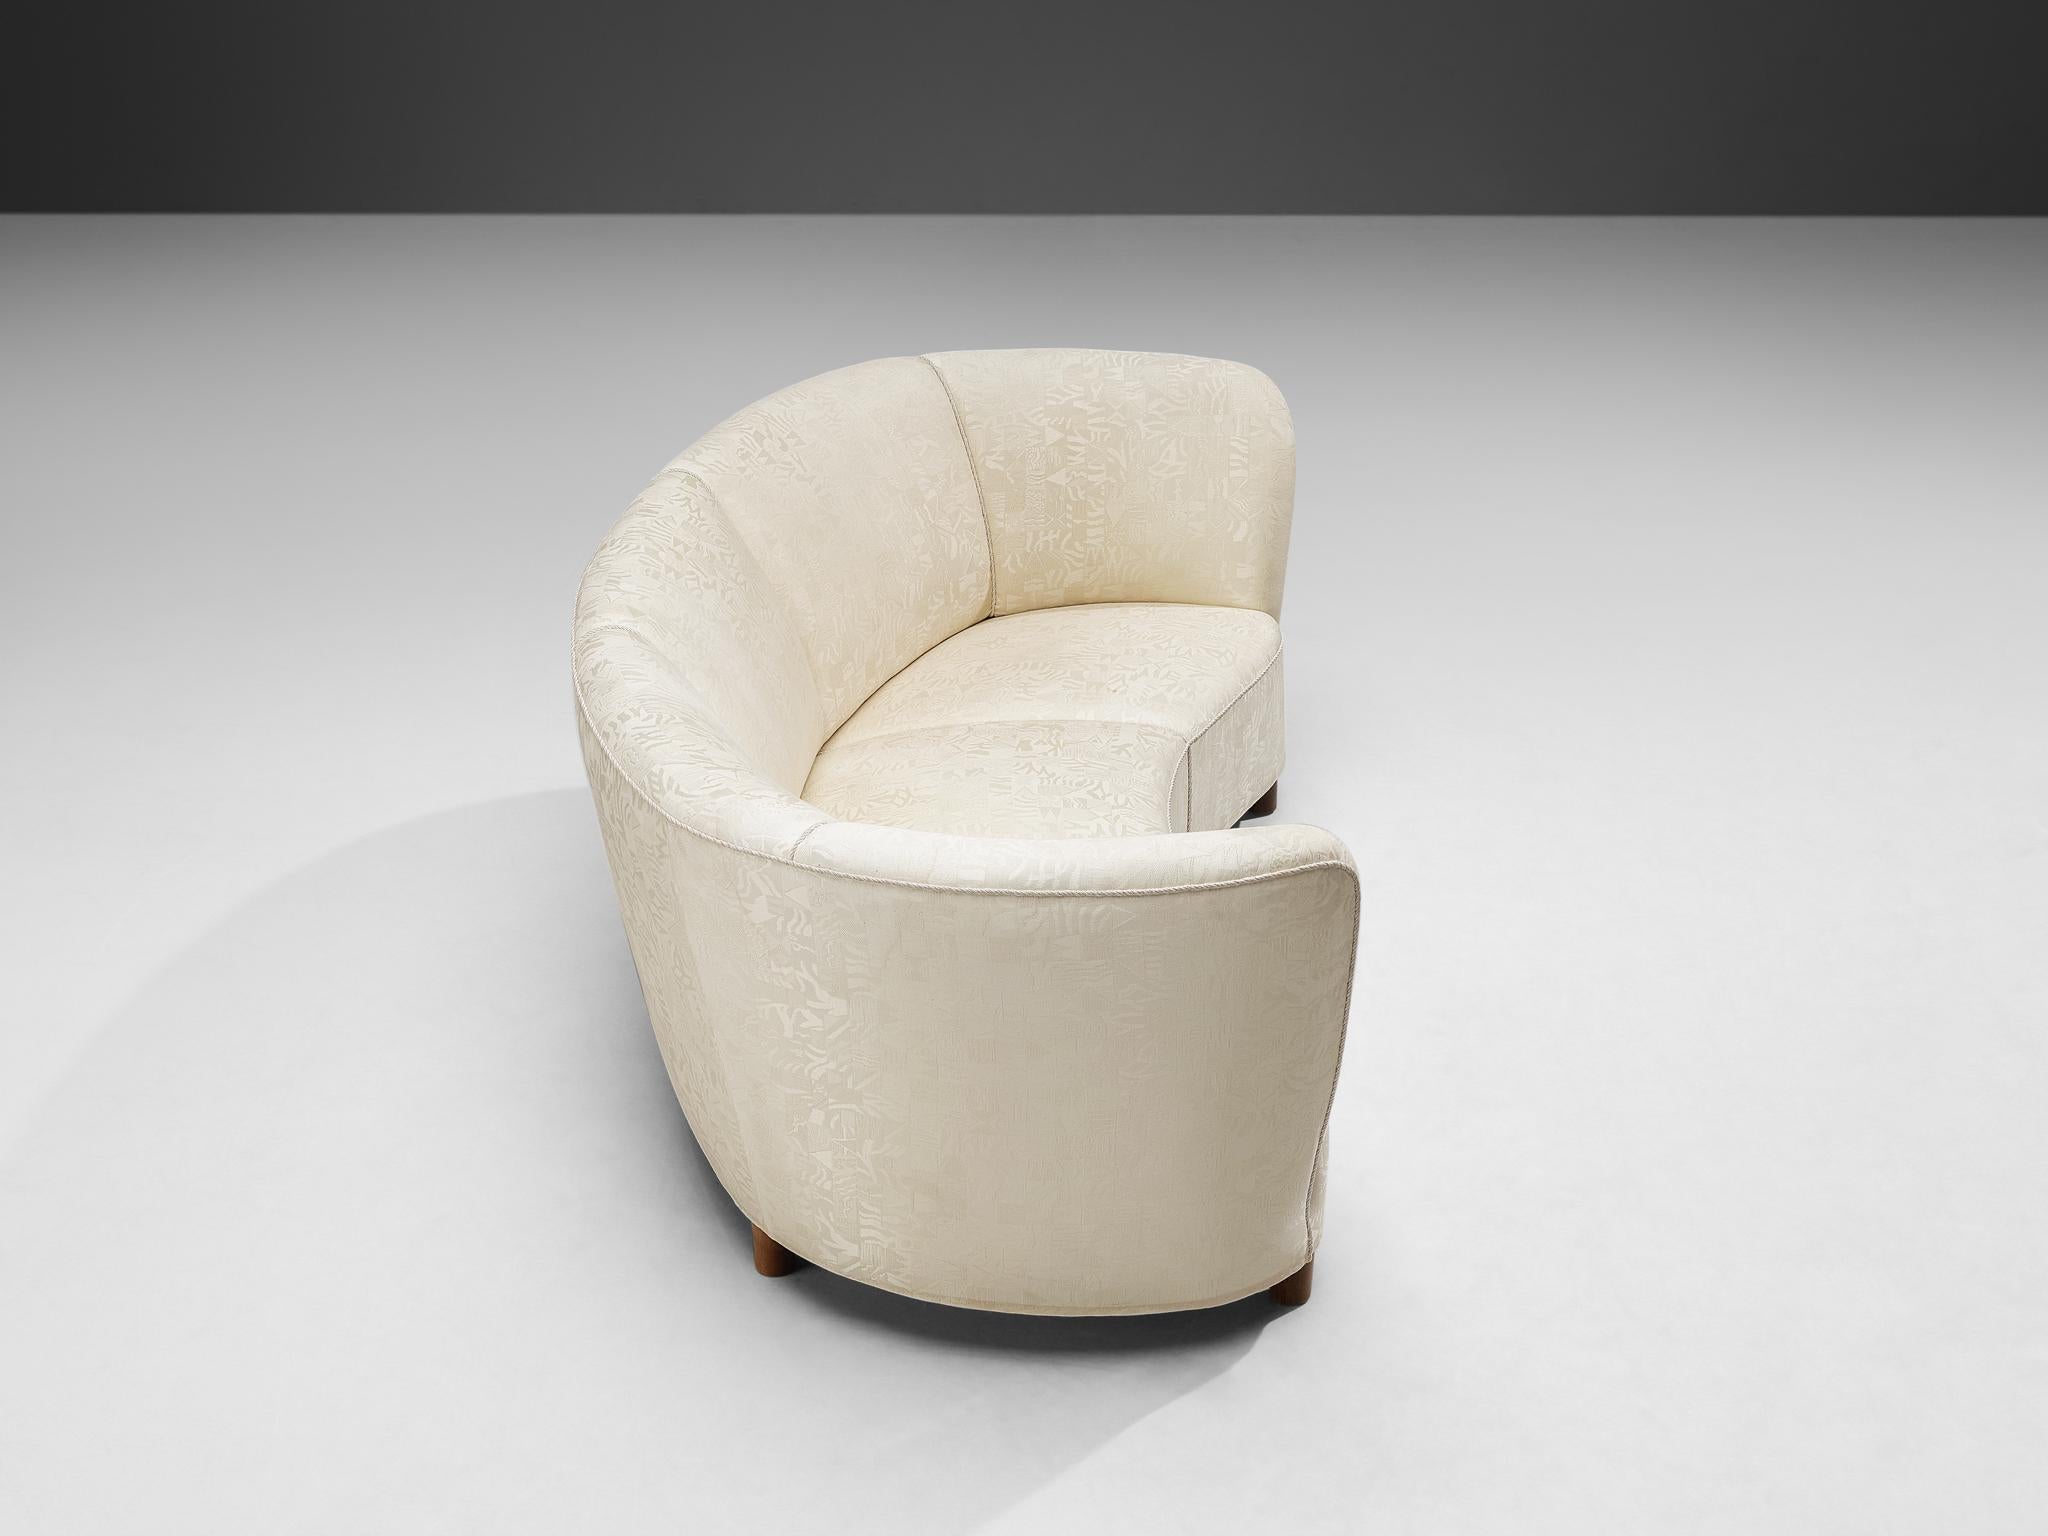 Fabric Danish Banana Sofa in Patterned Off White Upholstery  For Sale